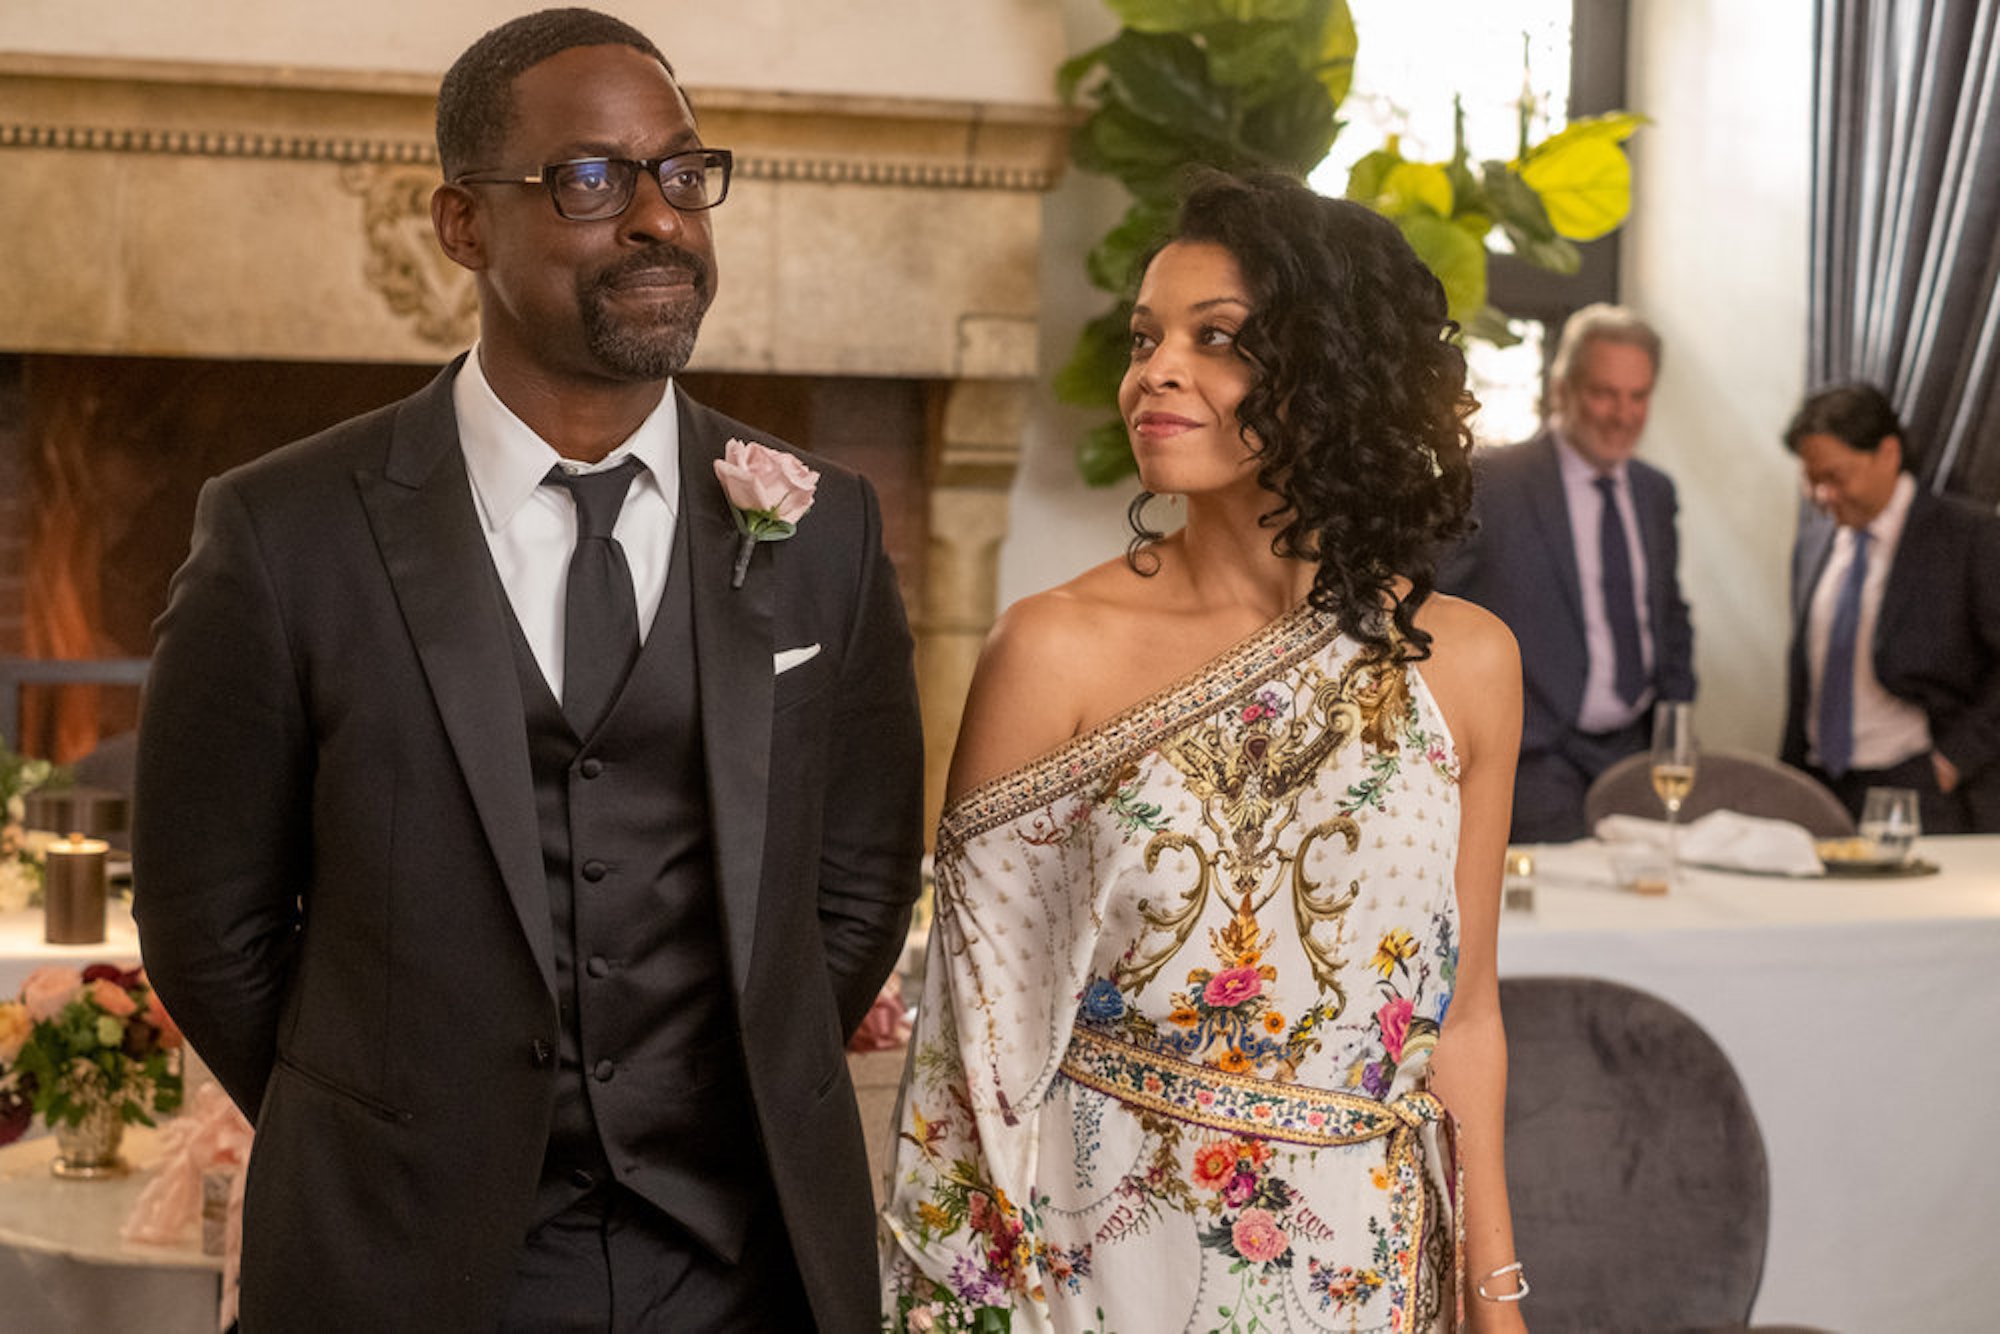 Randall and Beth from the 'This Is Us' Season 6 finale dressed up standing next to each other